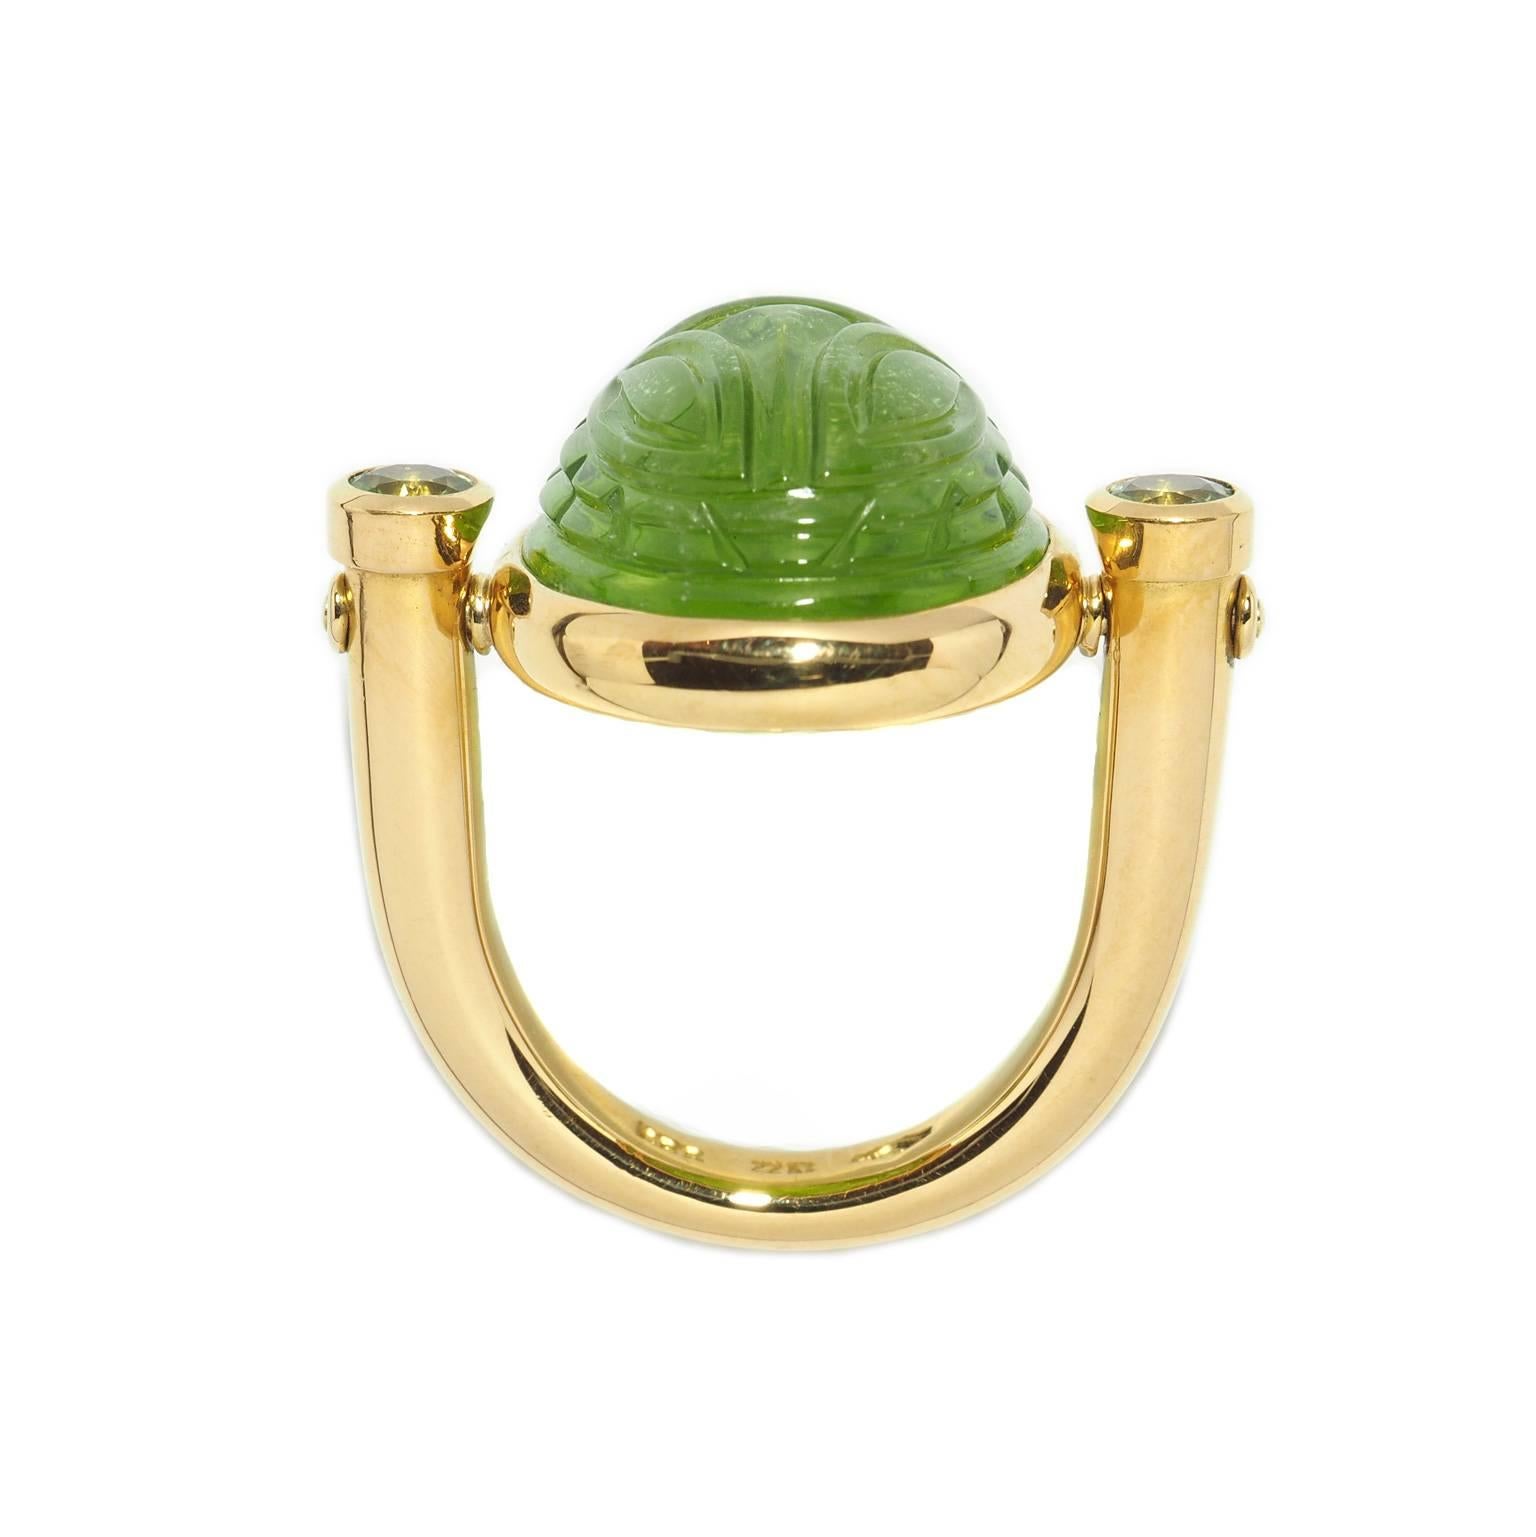 These 3 fresh green peridots will bring the spring to you.
The harmony between the warm yellow gold and the stones is magnificent.
The large peridot has a weight of 26.86 ct and the two small stones weigh 0.47 ct. This ring has a size of 58.
The